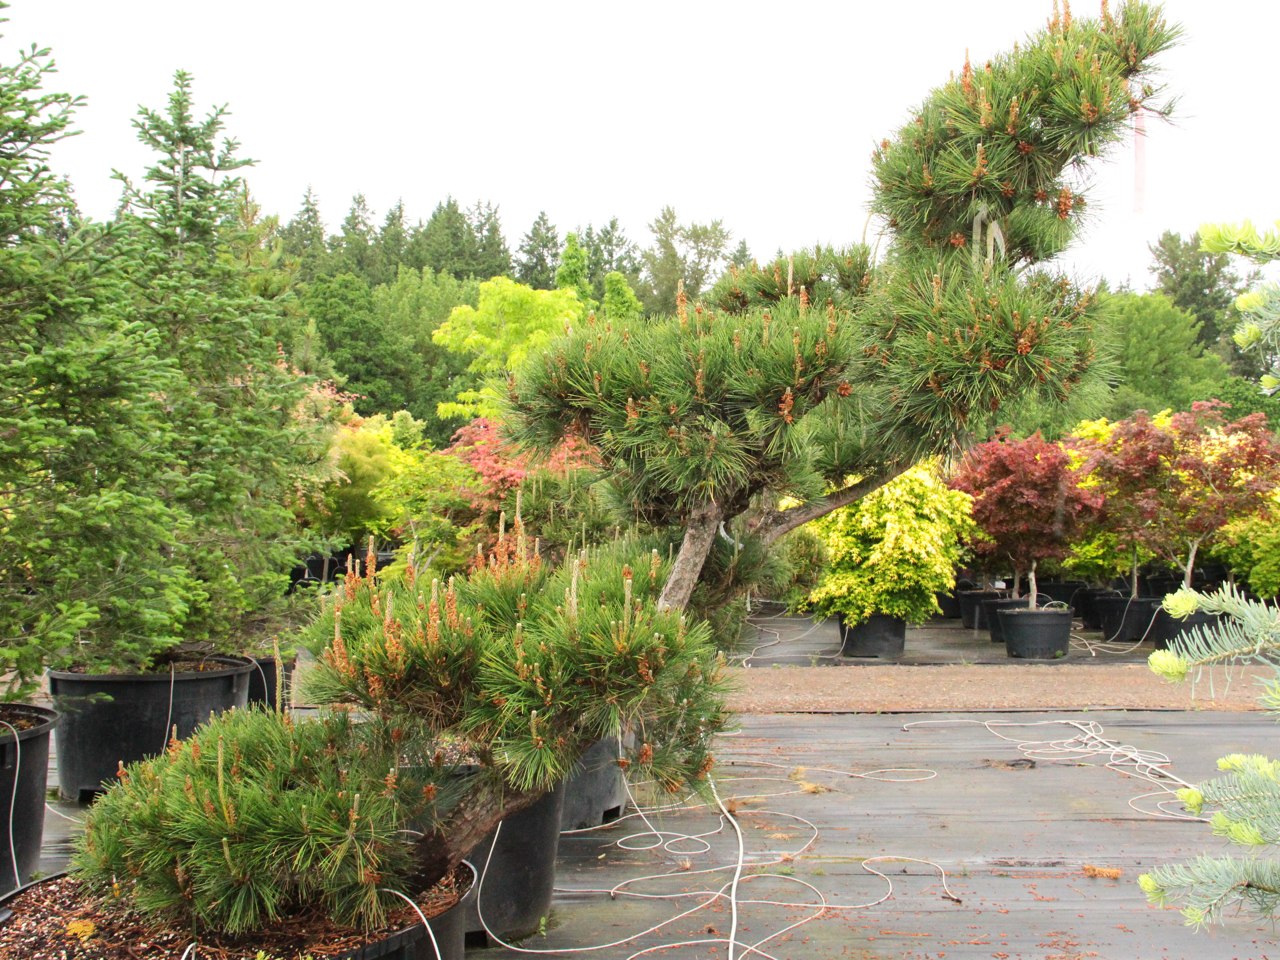 This irregular-growing species is iconic in Japanese gardens for its windswept habit and sculptural branching structure. The long dark-green needles and furrowed bark make for quite stunning specimens as they age.